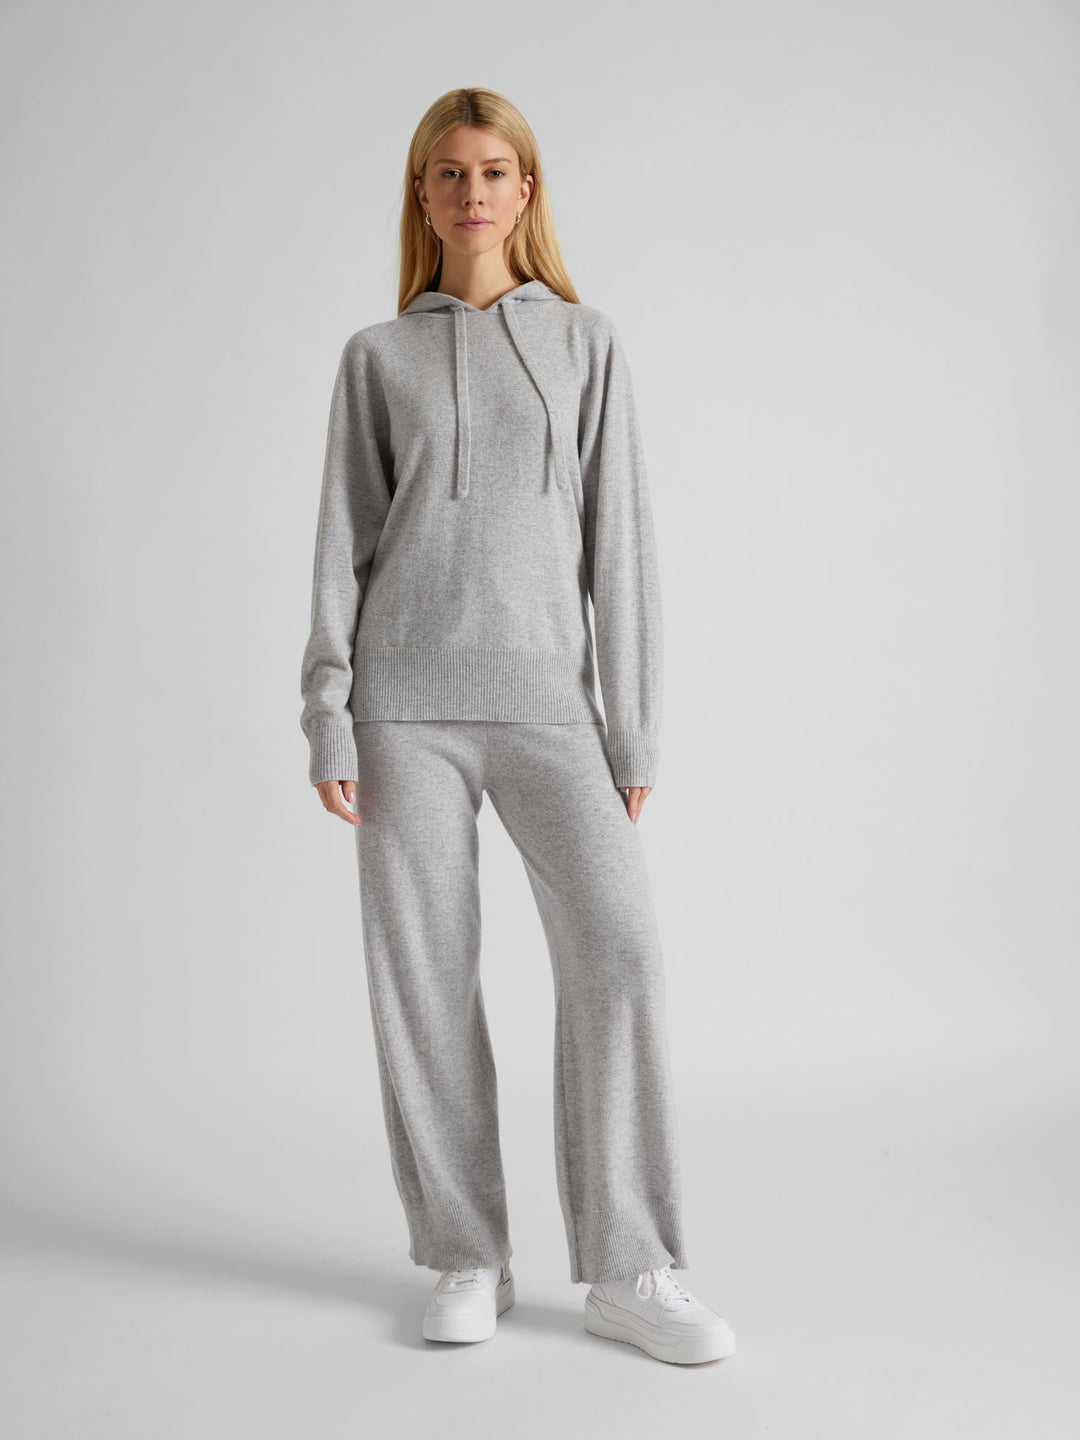 Cashmere hoodie "Lux Hoodie" in 100% pure cashmere. Scandinavian design by Kashmina. Color: Light Grey.